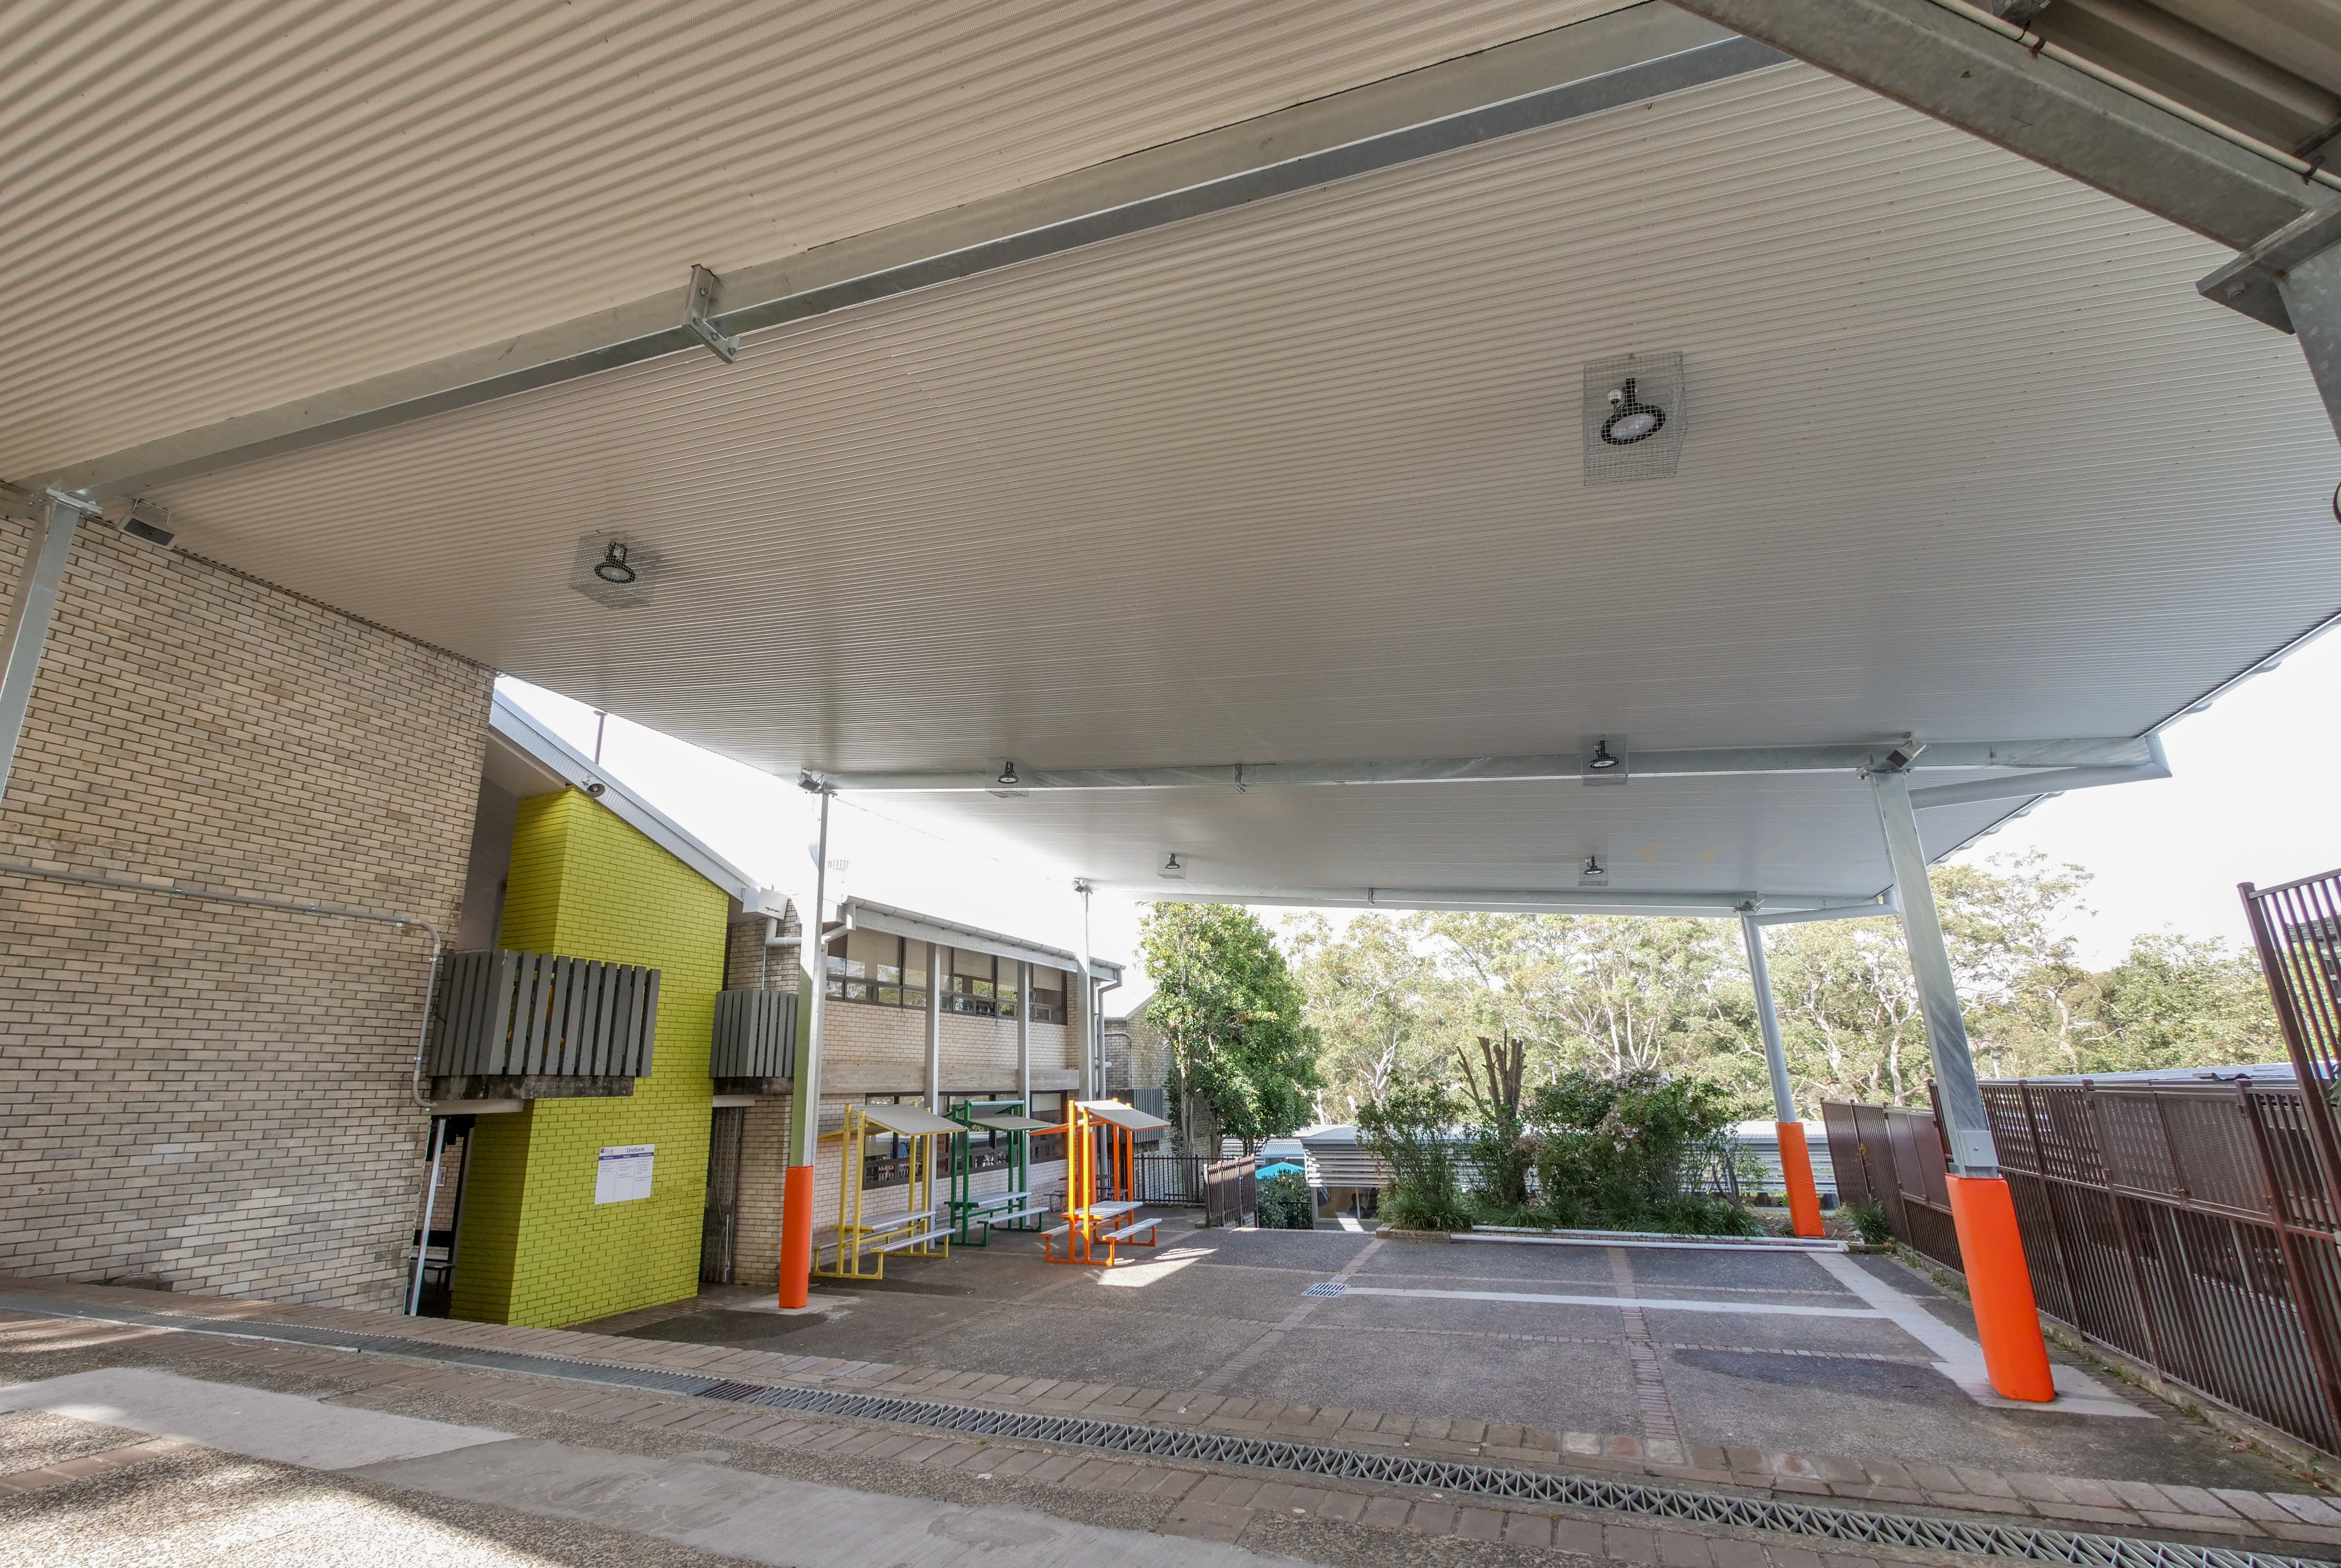 Three new shade structures at Ryde Secondary College